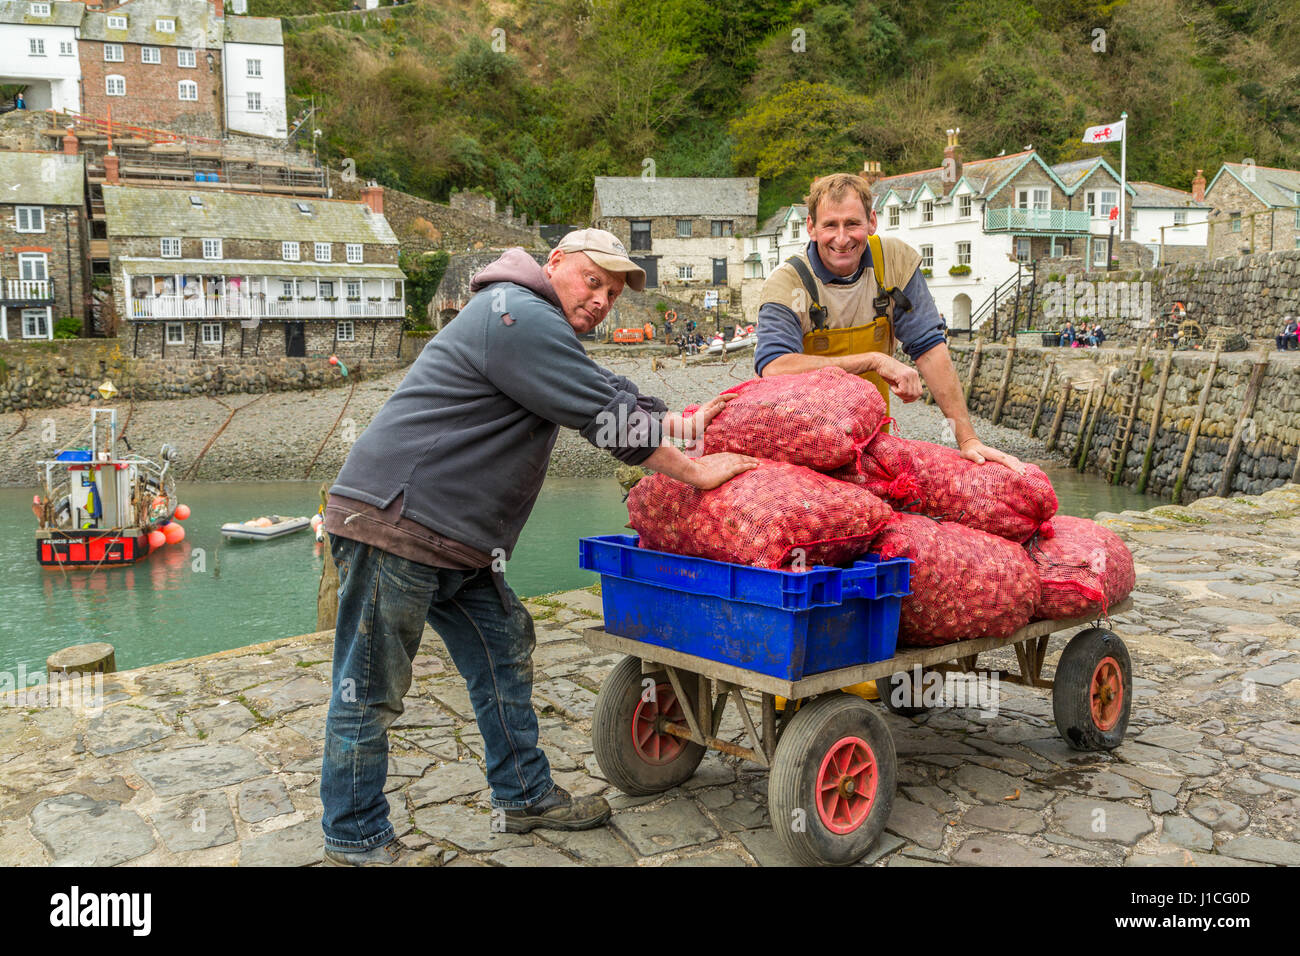 Clovelly,Devon,England. Professional Fishermen unload whelks the catch of the day in the sheltered harbour of this picturesque village in the UK Stock Photo